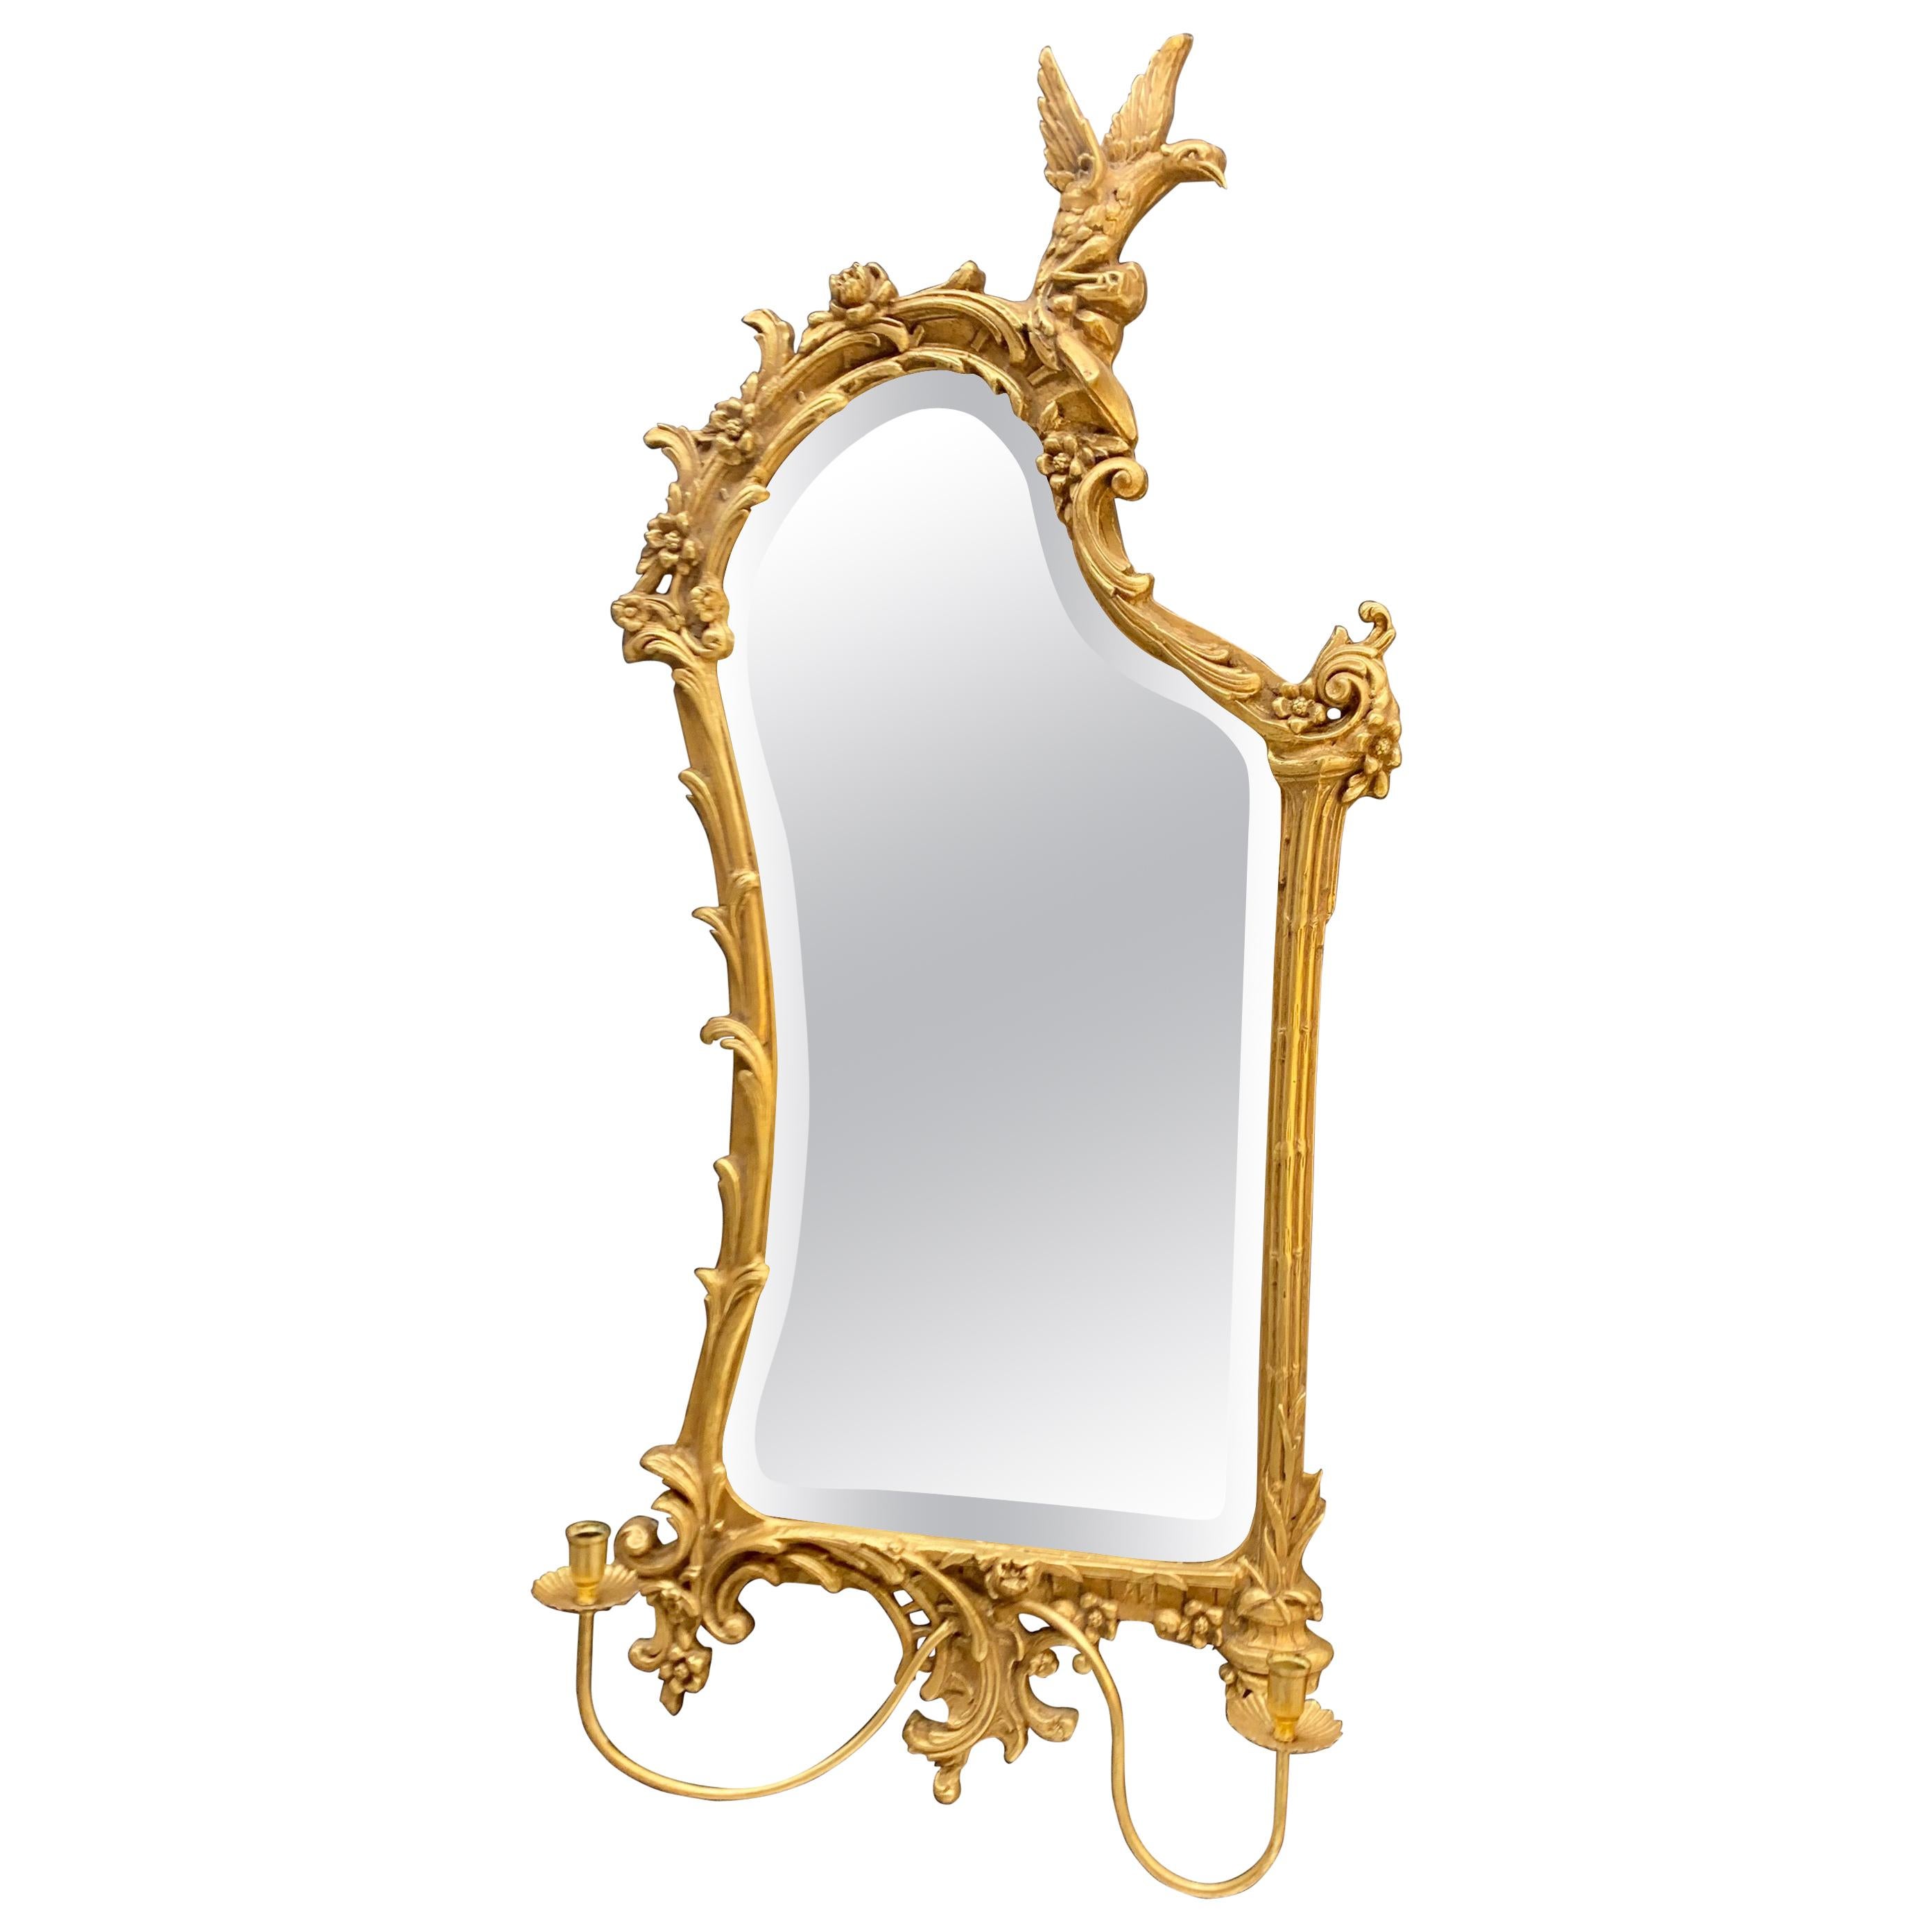 This gorgeous Roccoco mirror has a companion mirror that we are listing separately on 1stDibs this week. The mirror was likely made in the early part of the 20th century but in the same Italian region, and appear to have a more Japanese influence in